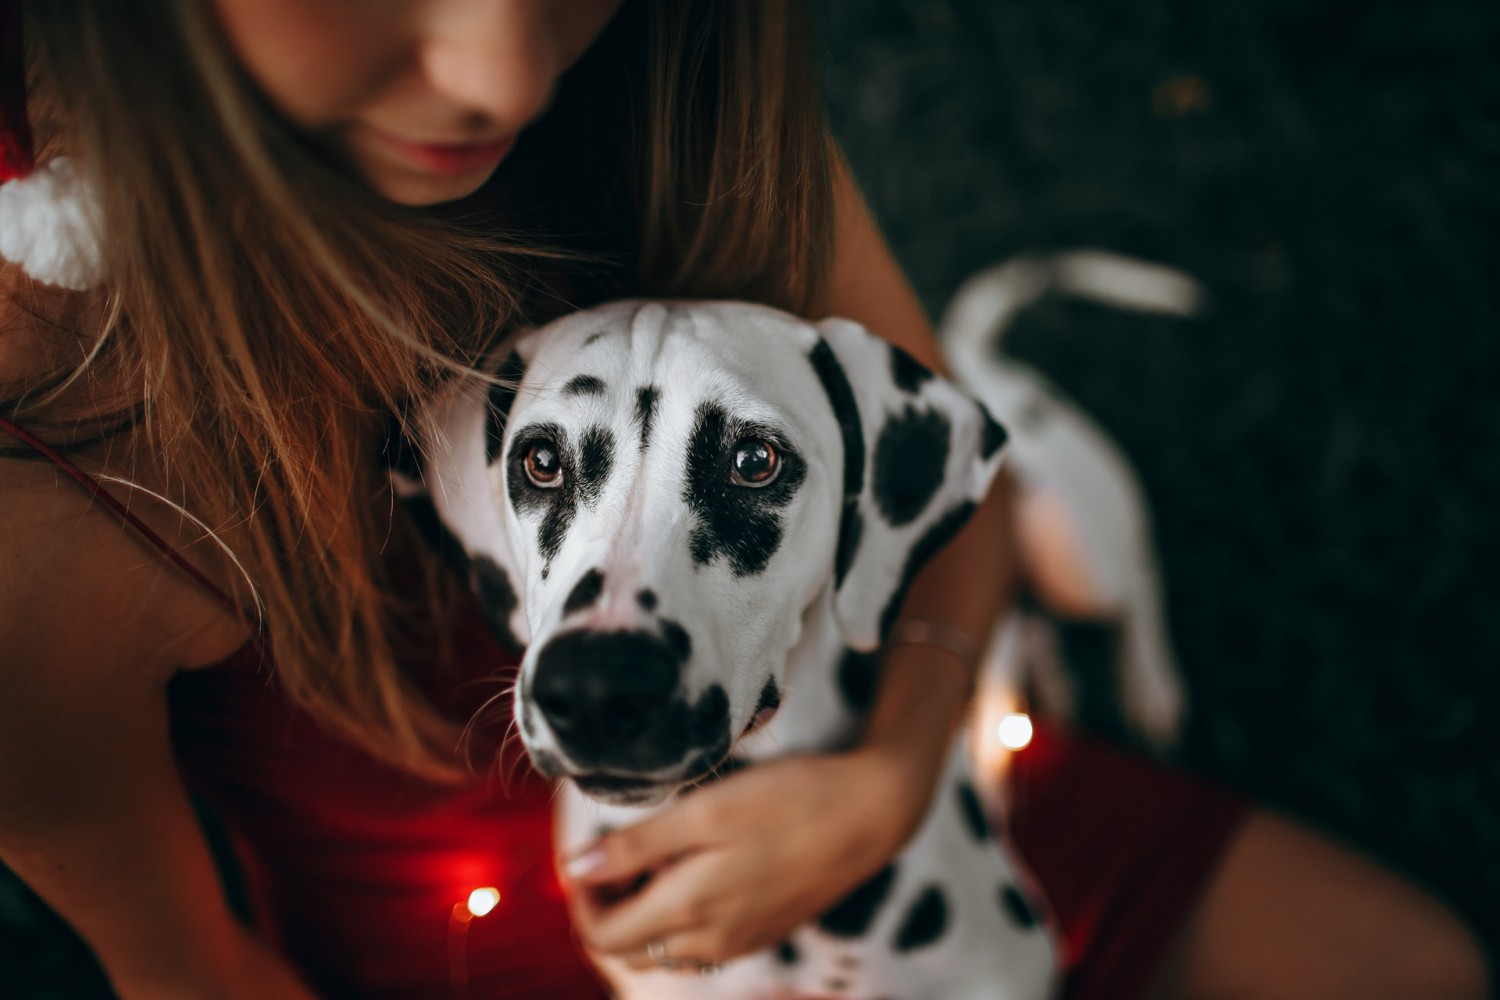 Adorable Dalmatian dog, held by female owner